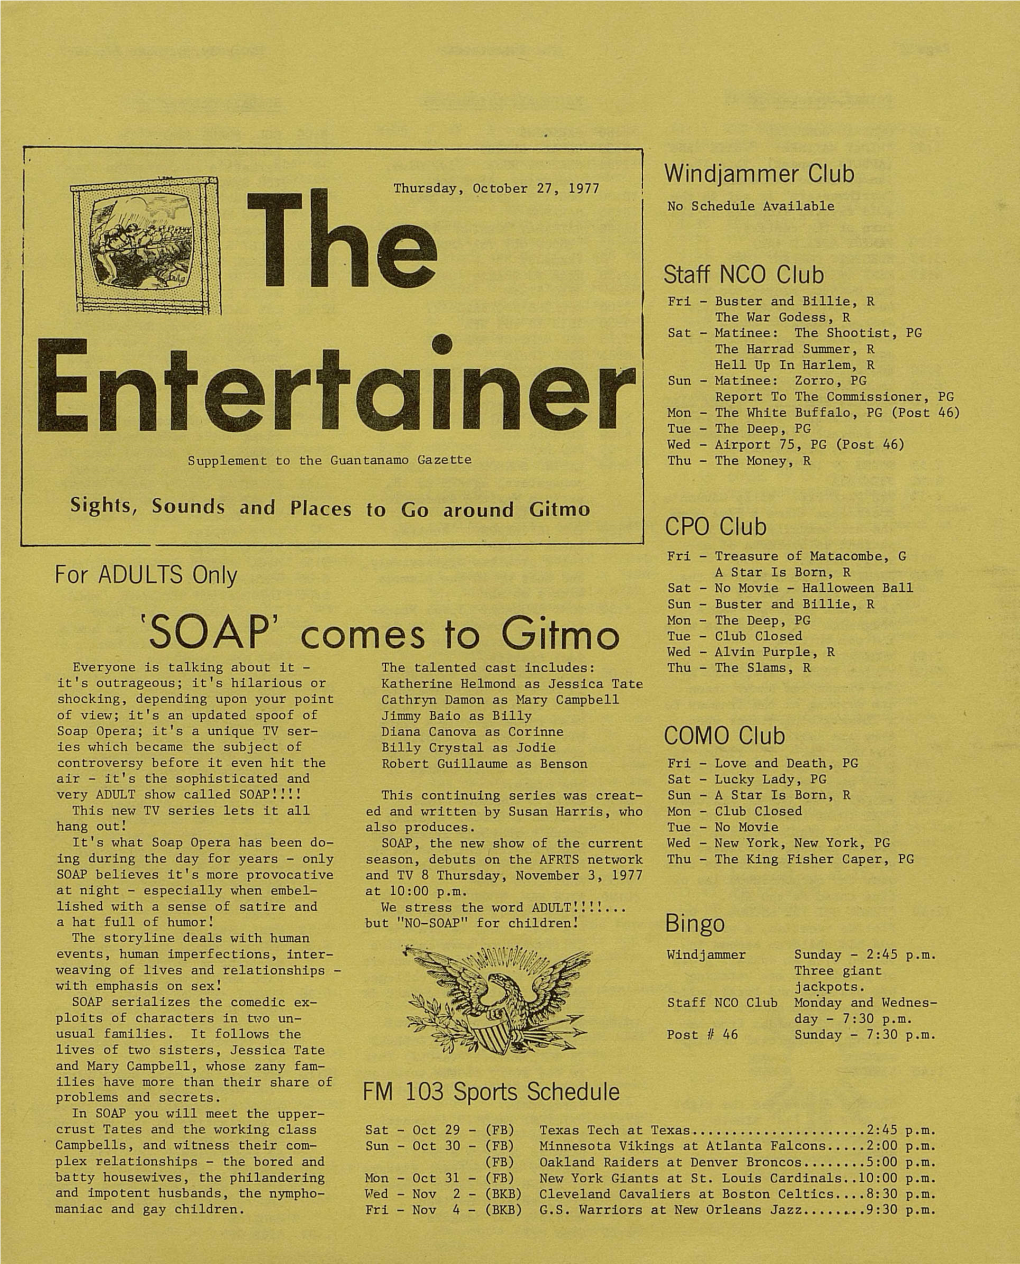 Entertainer Wed - Airport 75, PG(Post46) Supplement to the Guantanamo Gazette Thu - the Money, R